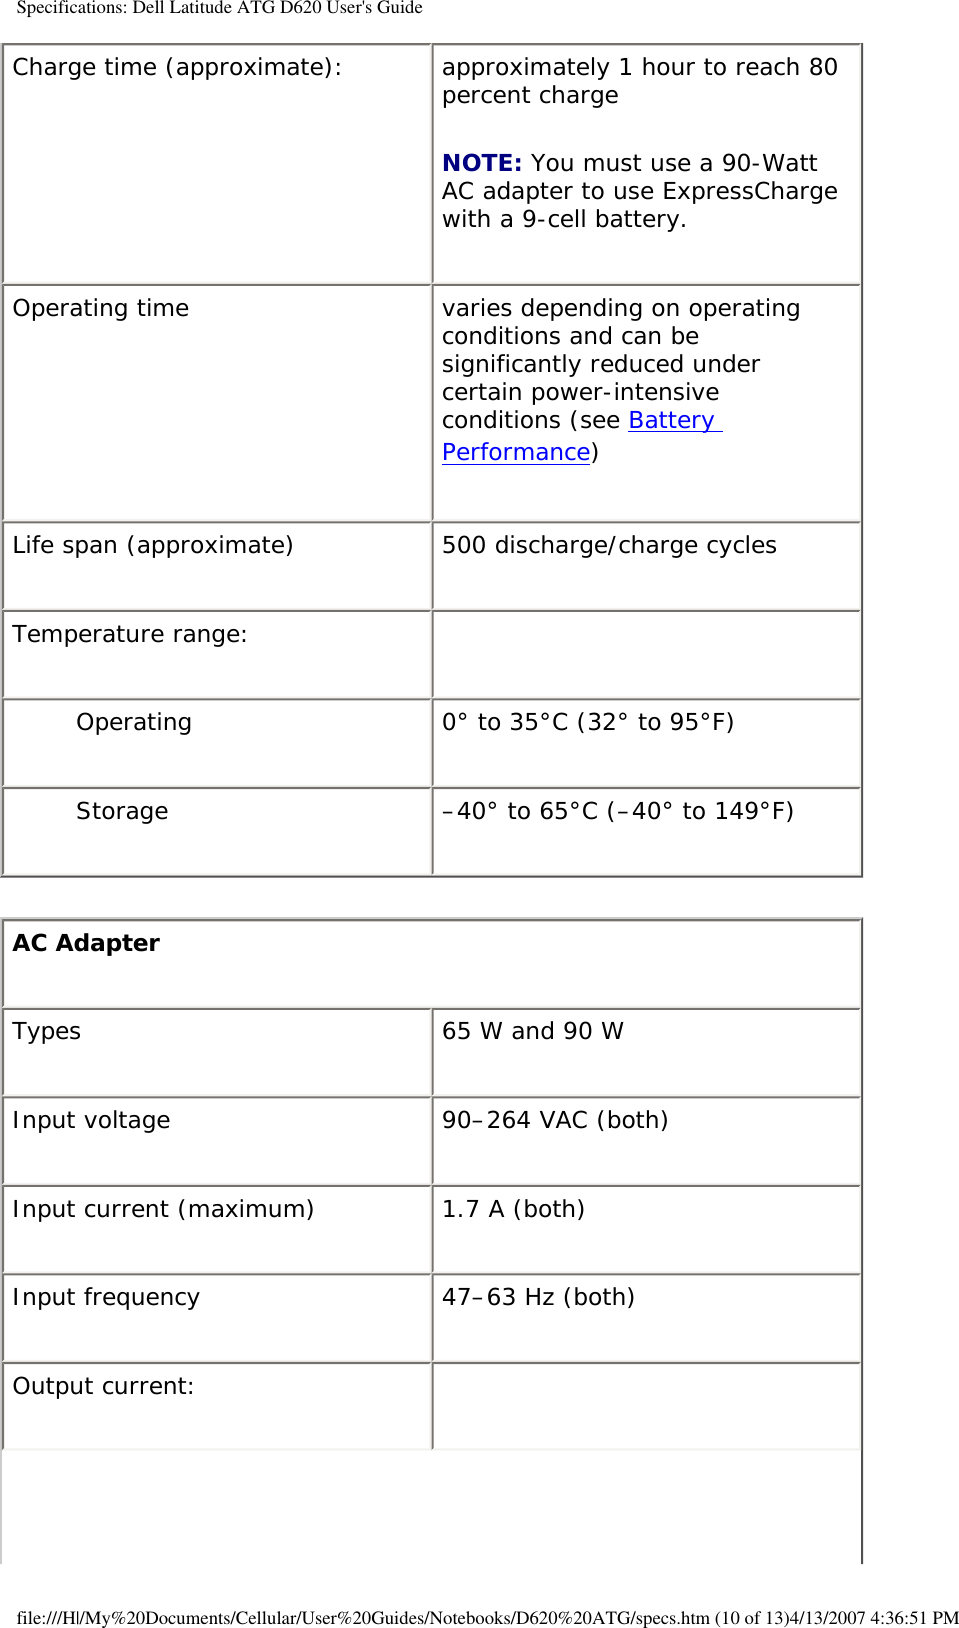 Specifications: Dell Latitude ATG D620 User&apos;s GuideCharge time (approximate): approximately 1 hour to reach 80 percent chargeNOTE: You must use a 90-Watt AC adapter to use ExpressCharge with a 9-cell battery.Operating time varies depending on operating conditions and can be significantly reduced under certain power-intensive conditions (see Battery Performance)Life span (approximate) 500 discharge/charge cyclesTemperature range:  Operating 0° to 35°C (32° to 95°F)Storage –40° to 65°C (–40° to 149°F)AC AdapterTypes 65 W and 90 WInput voltage 90–264 VAC (both)Input current (maximum) 1.7 A (both)Input frequency 47–63 Hz (both)Output current:  file:///H|/My%20Documents/Cellular/User%20Guides/Notebooks/D620%20ATG/specs.htm (10 of 13)4/13/2007 4:36:51 PM